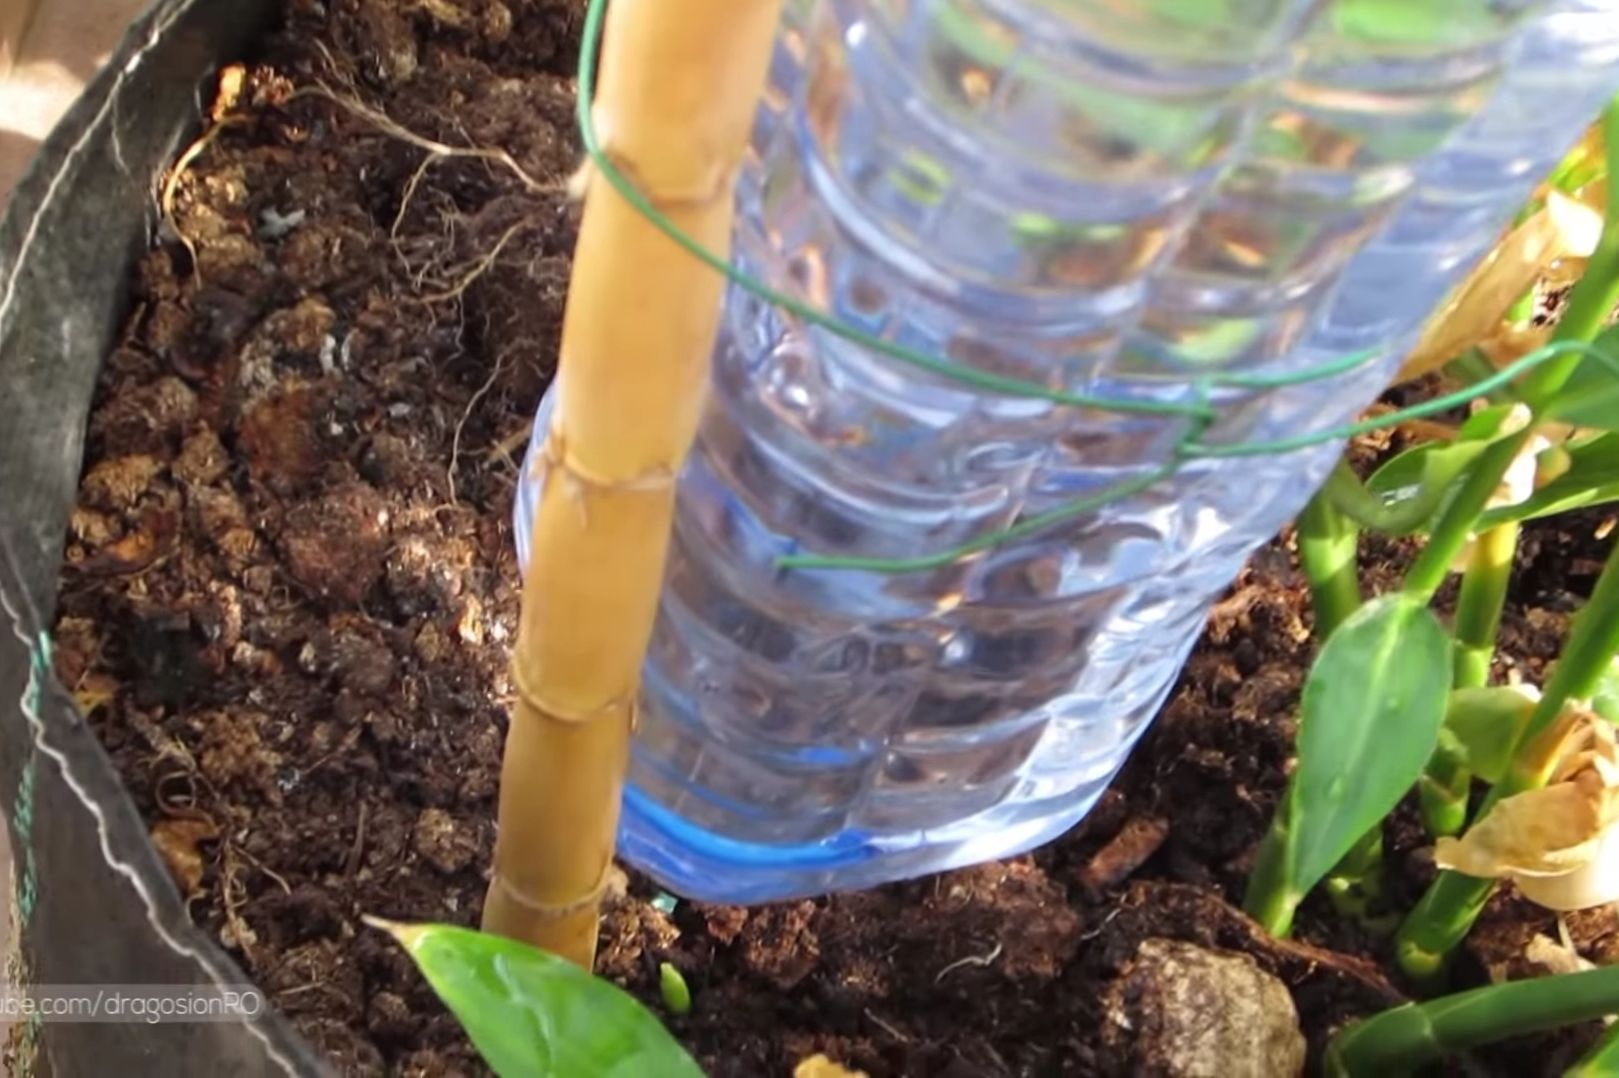 Self watering bottle secured in place on a stick